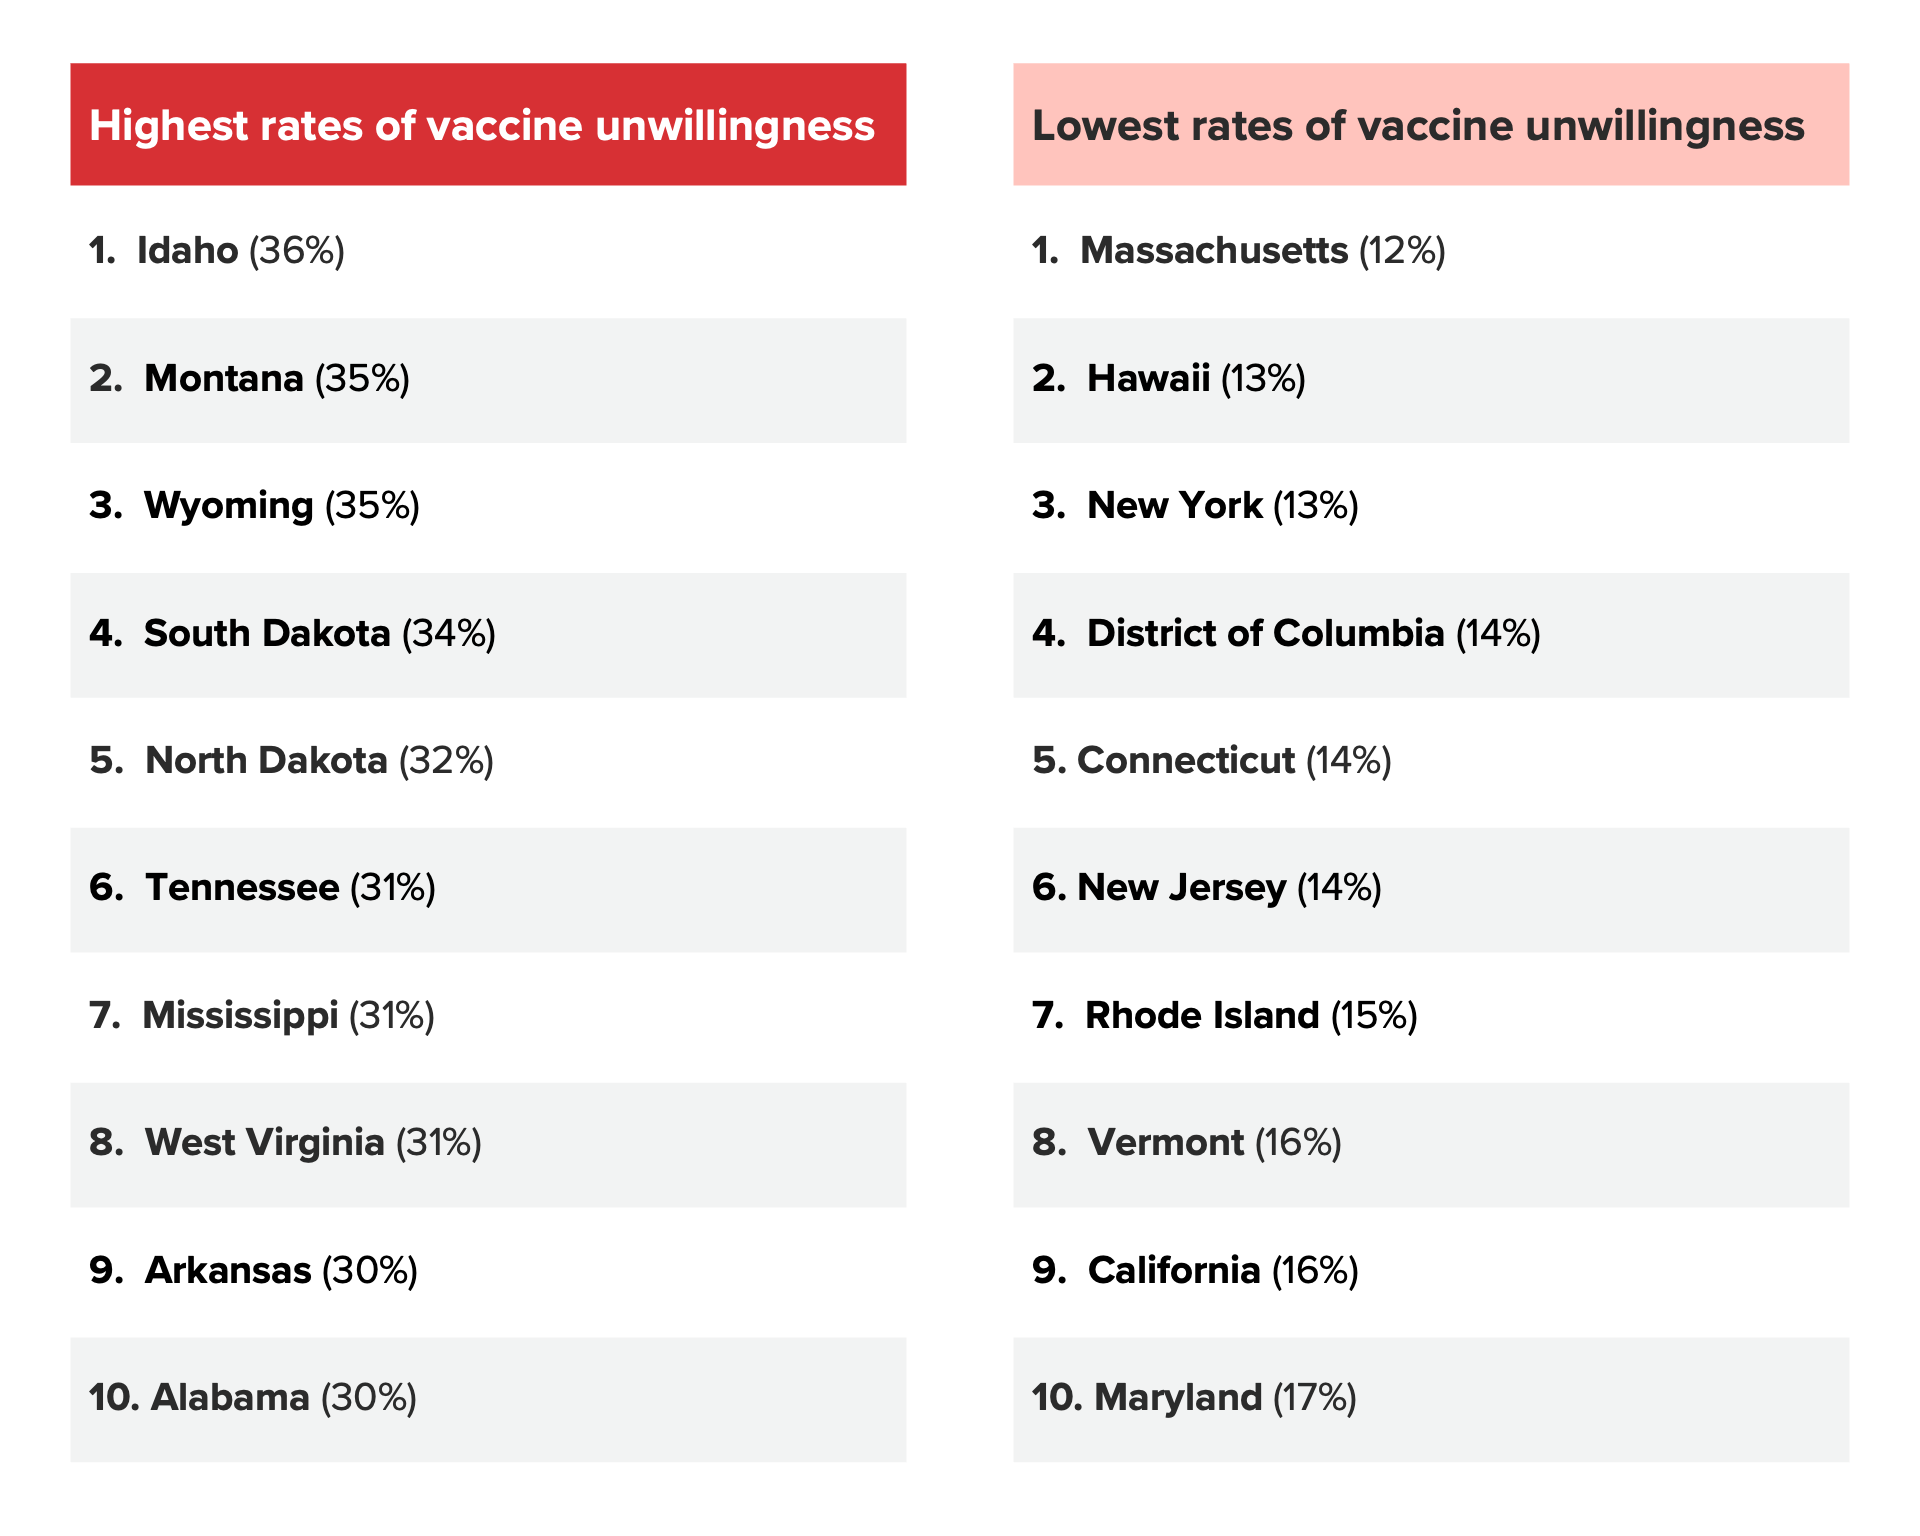 Table conveying the states with the highest and lowest rates of vaccine unwillingness.